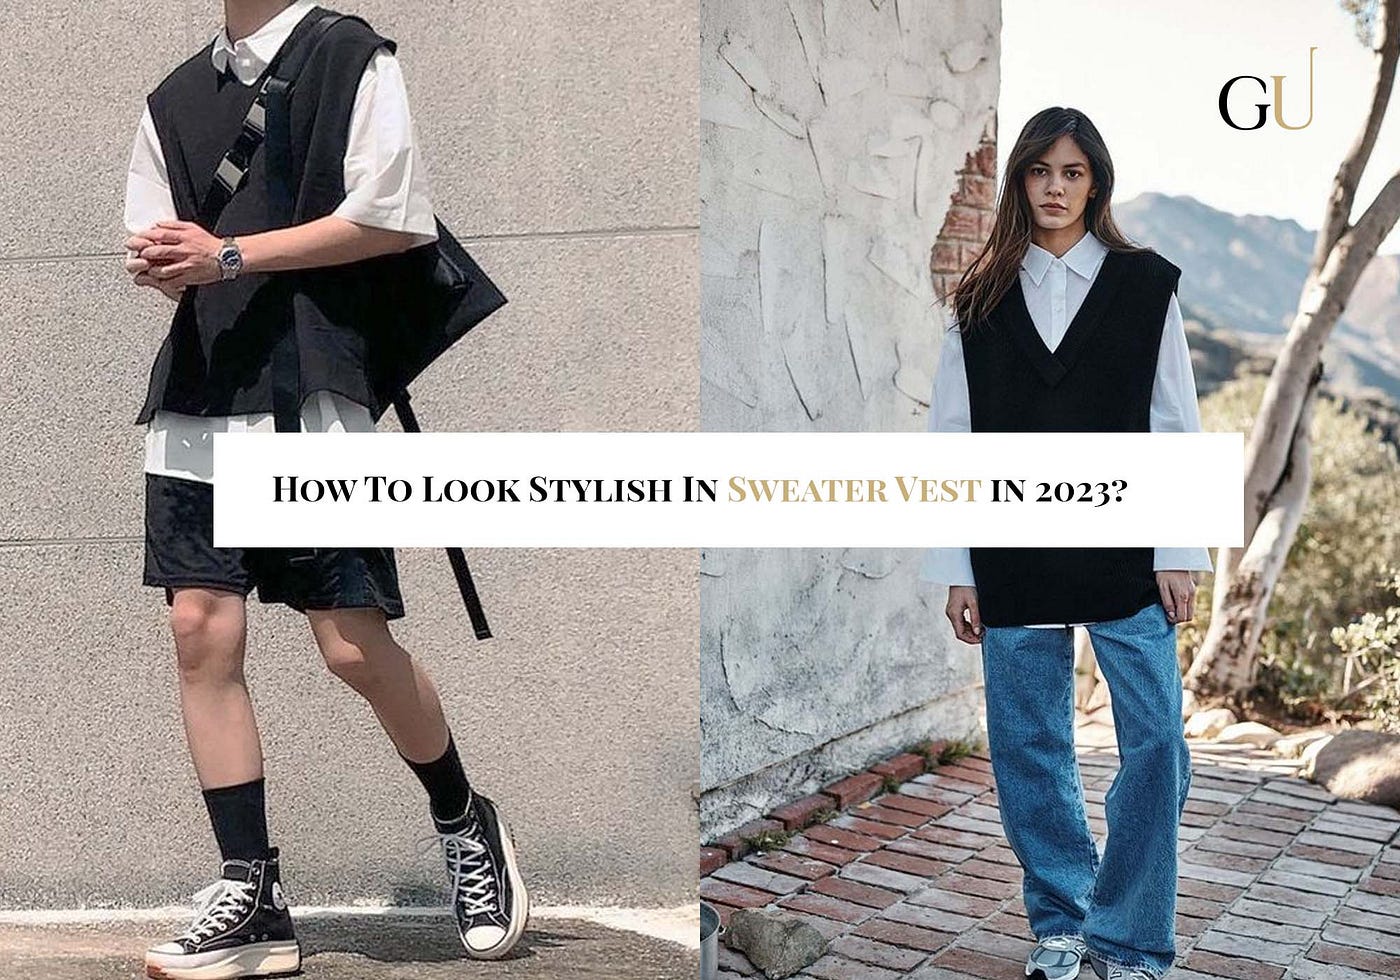 Sweater Vests For Women 2023: 30 Best Outfits To Copy in 2023